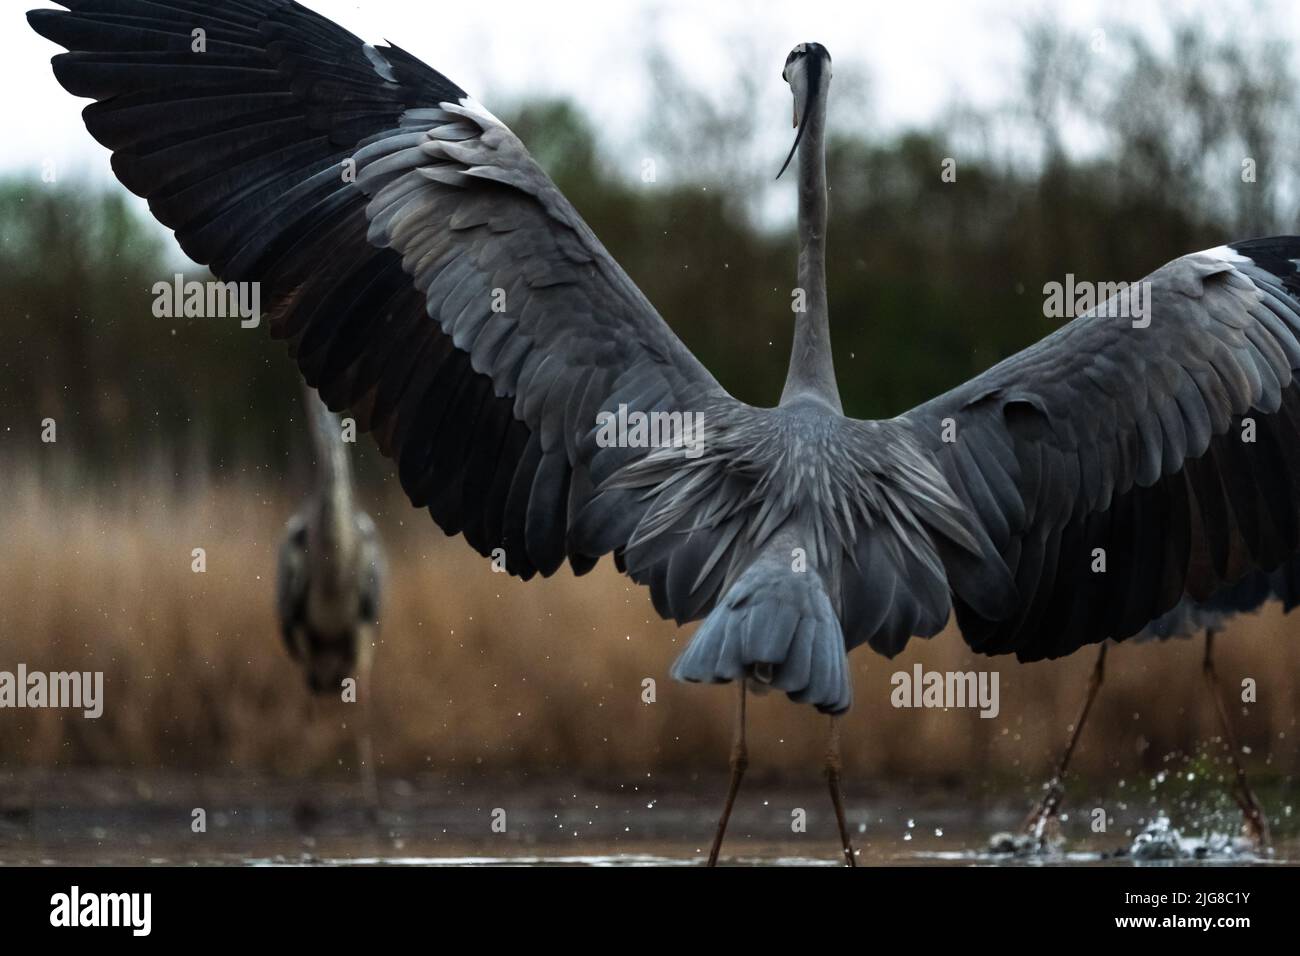 A closeup of a grey heron (Ardea cinerea) with wide-open wings standing in a pond Stock Photo